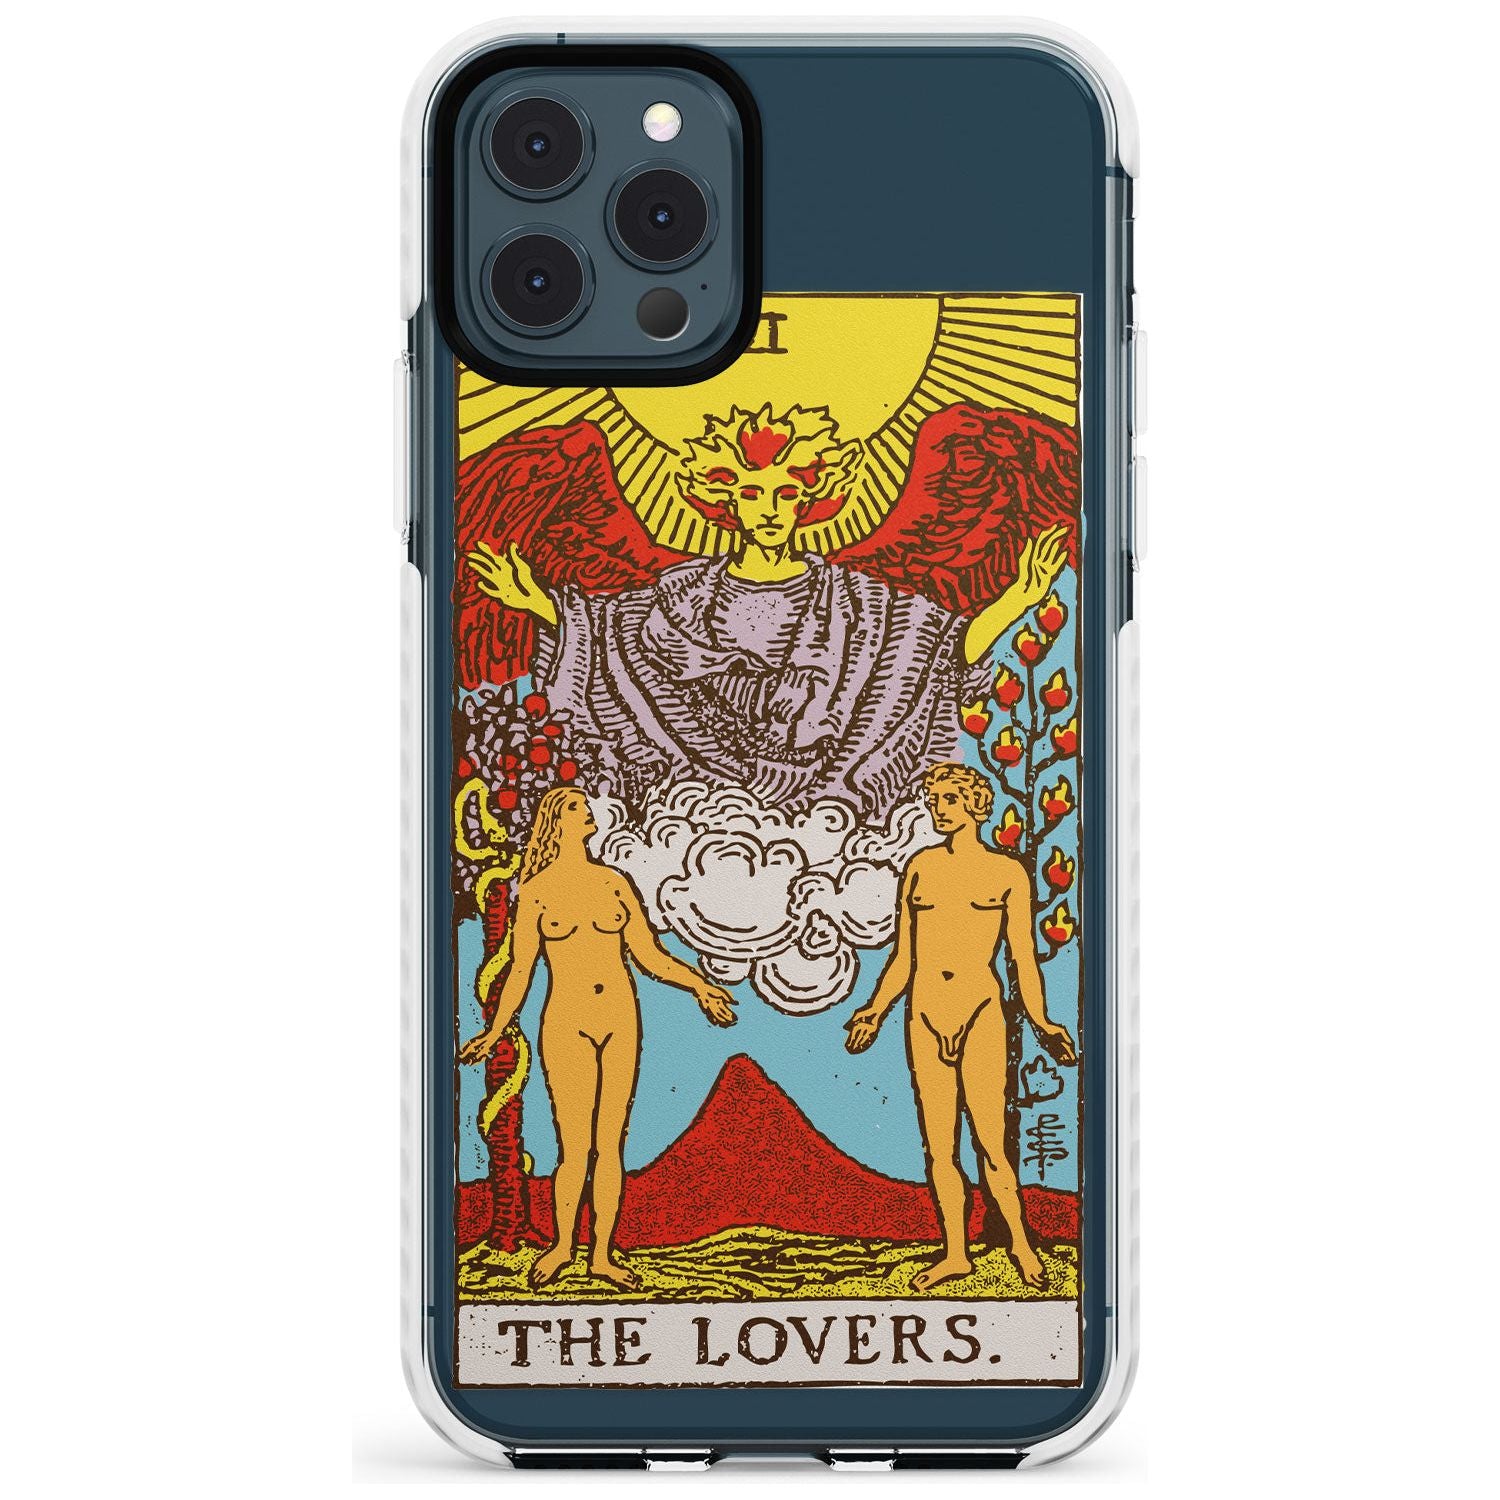 The Lovers Tarot Card - Colour Slim TPU Phone Case for iPhone 11 Pro Max